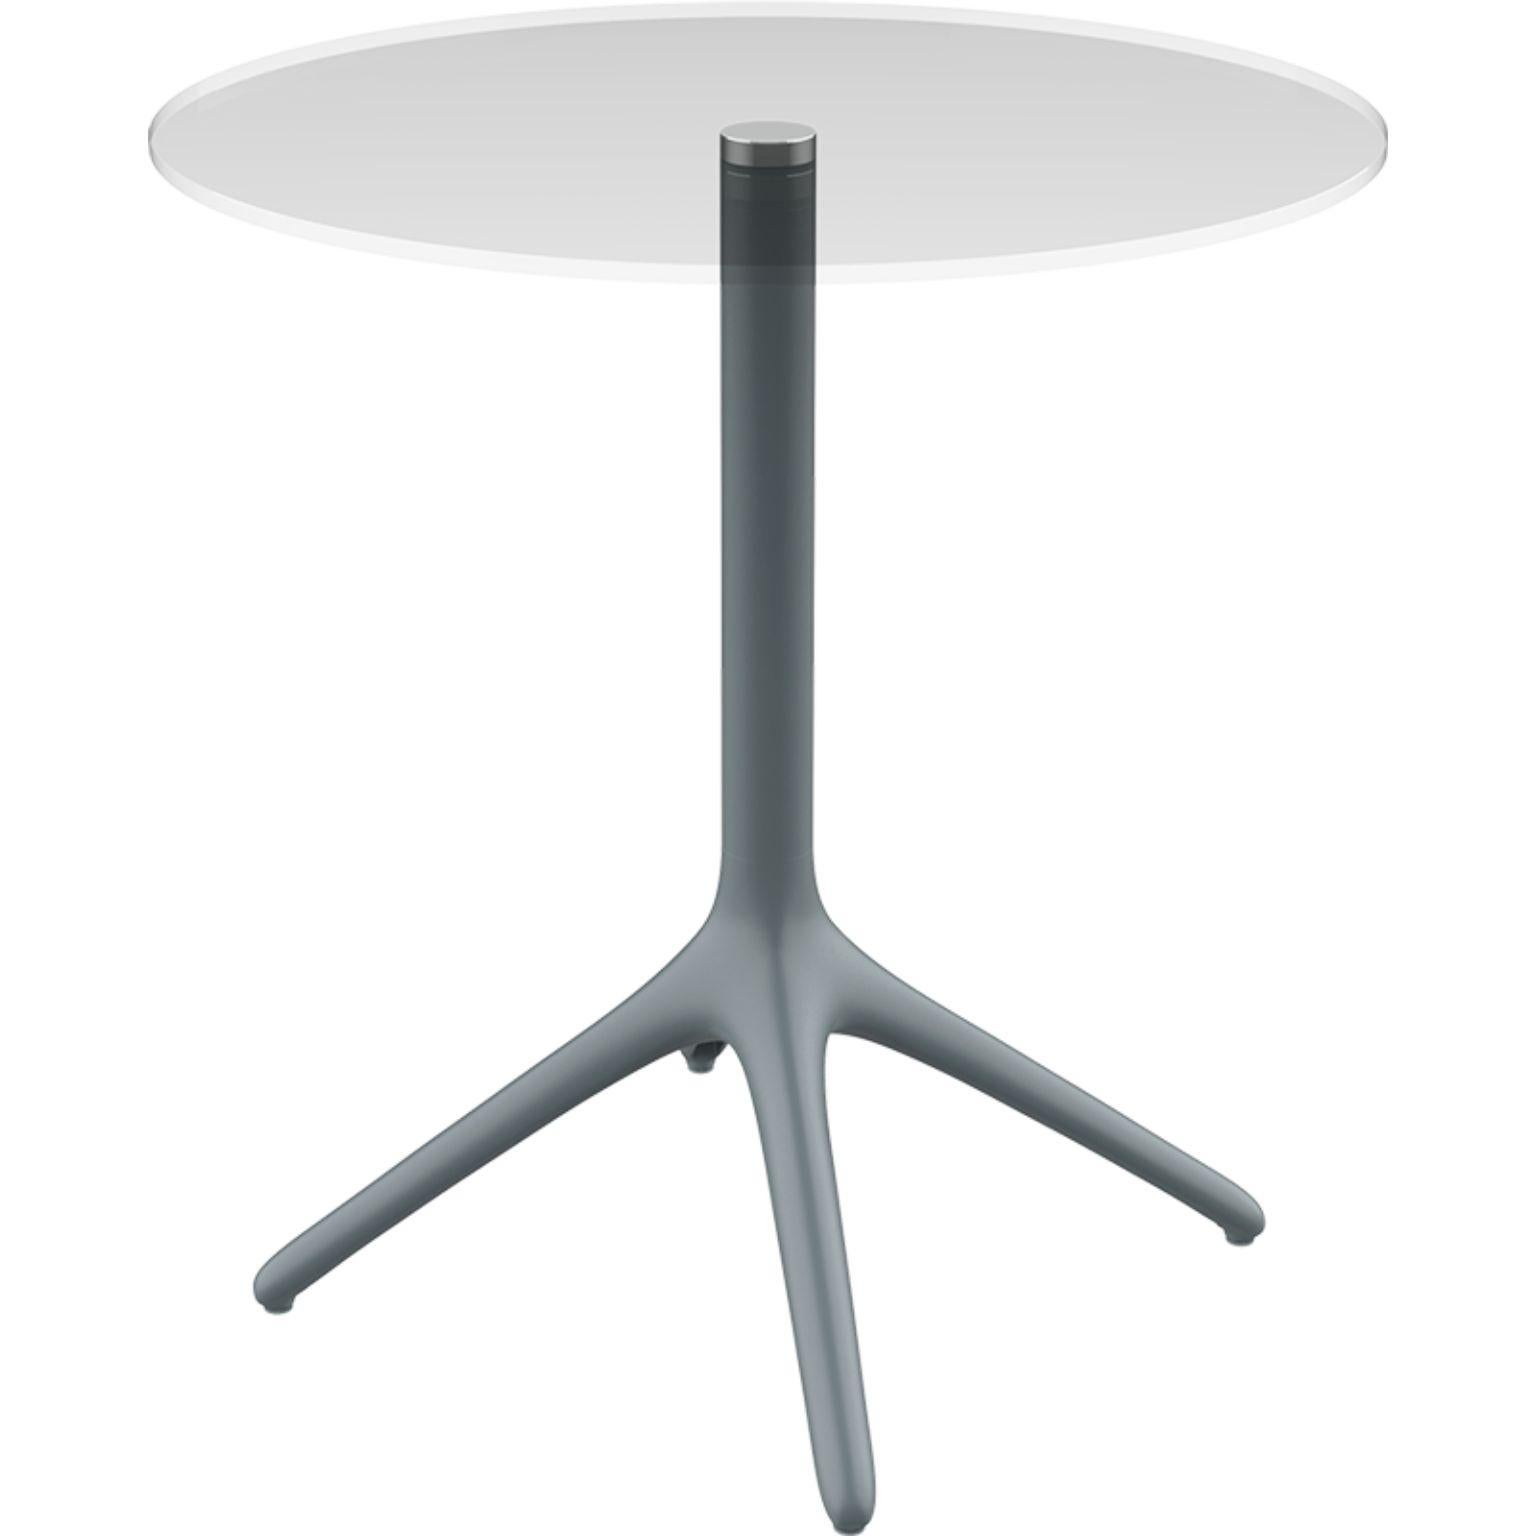 Uni grey table 73 by Mowee.
Dimensions: D45.5 x H73 cm.
Material: Aluminium, tempered glas
Weight: 5.5 kg
Also Available in different colours and finishes. Collapsable version available. 

A table designed to be as versatile as possible and